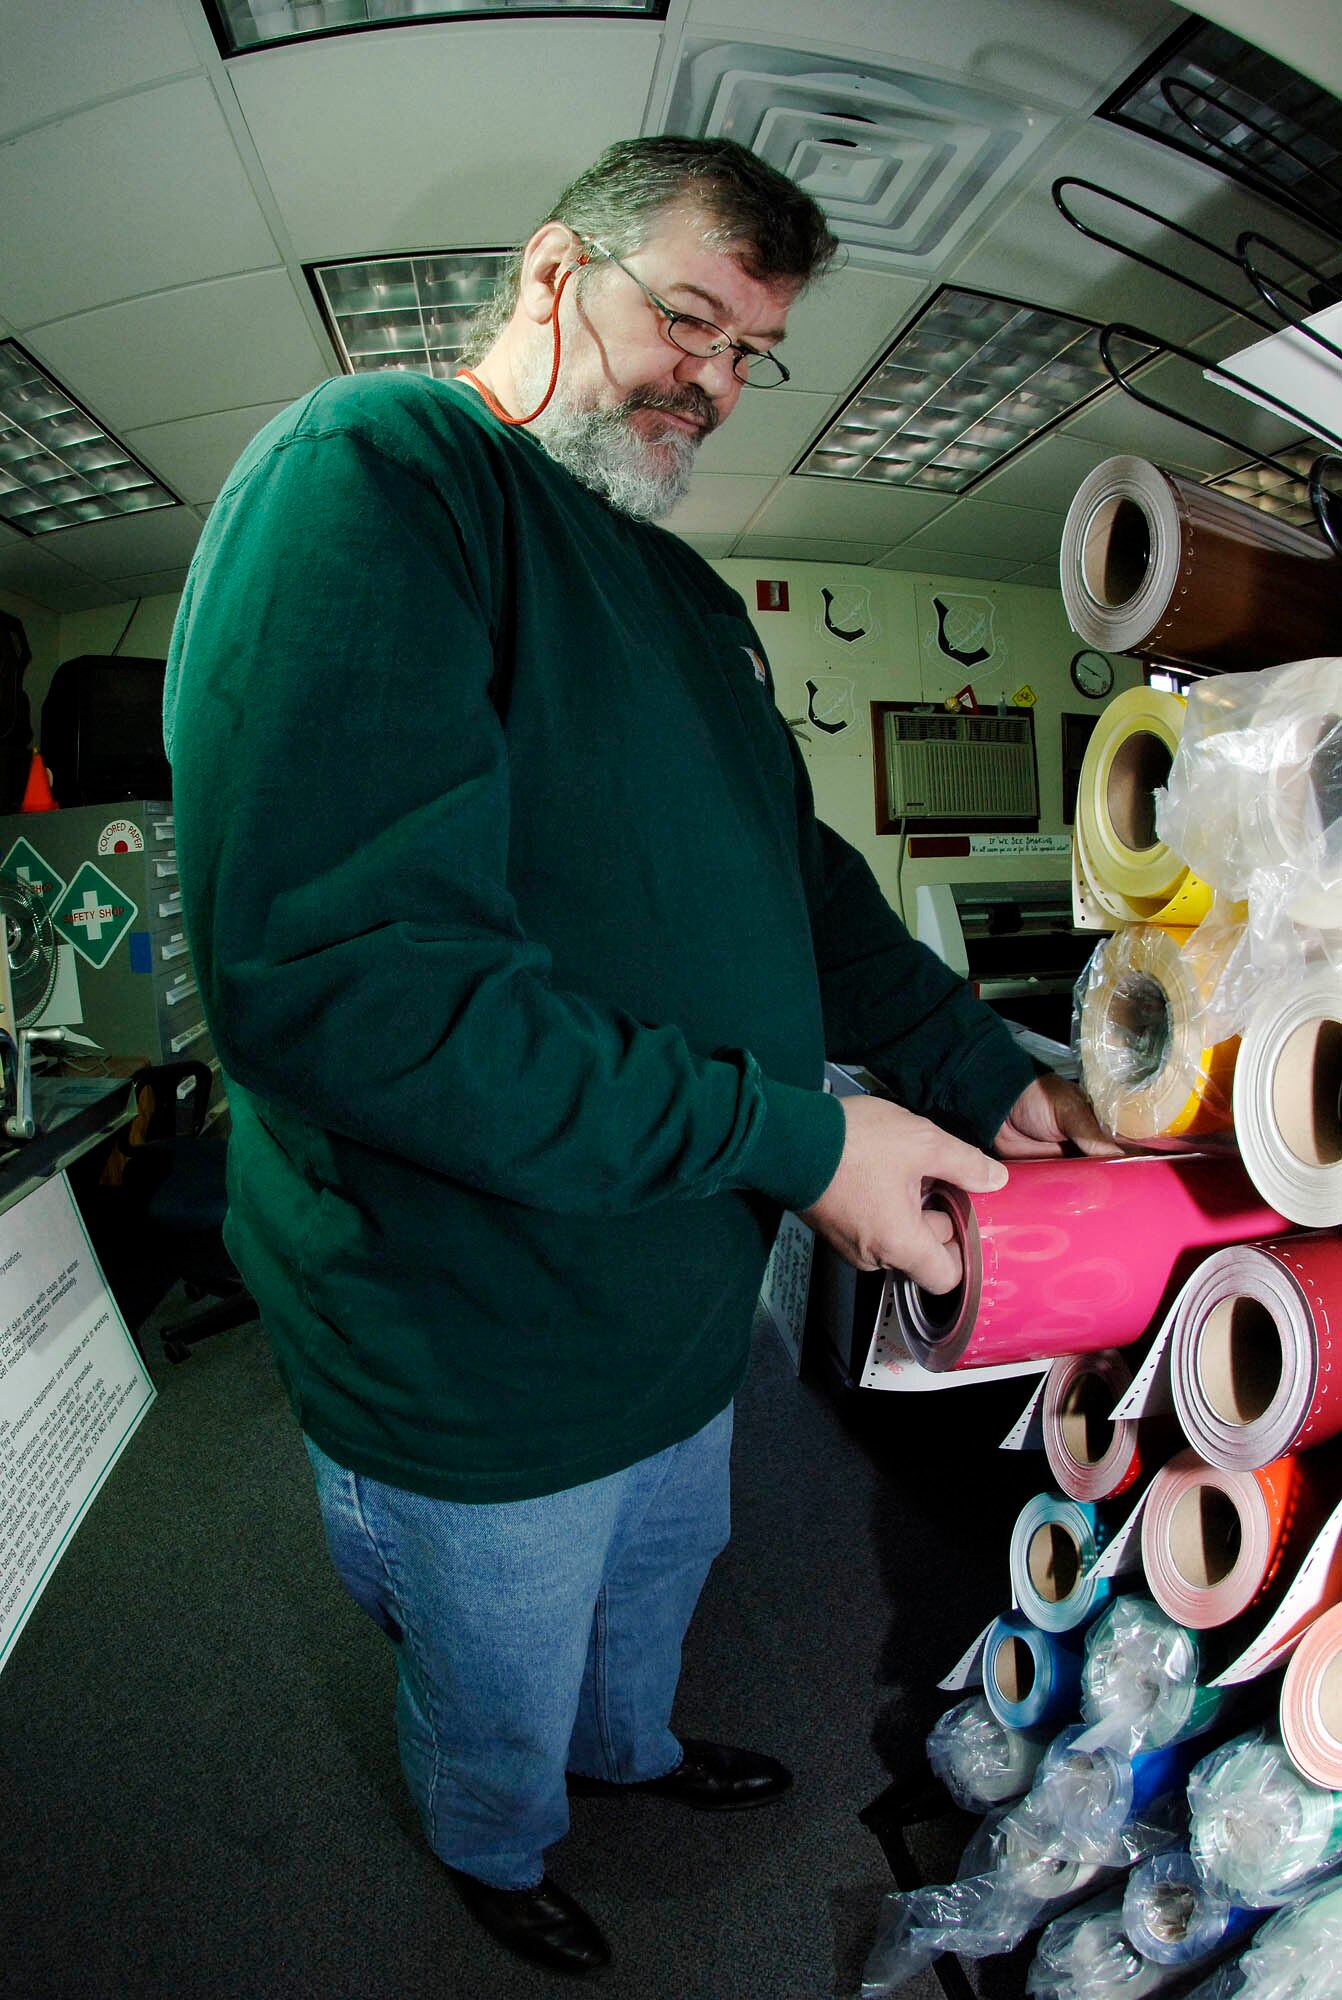 FAIRCHILD AIR FORCE BASE, Wash. – Dave Franklin, 92nd Civil Engineer Squadron sign painter, selects the proper color scheme for a sign March 18. Once the vinyl is chosen, it’s cut and placed into a plotter for print. (U.S. Air Force photo/Staff Sgt. JT May III)